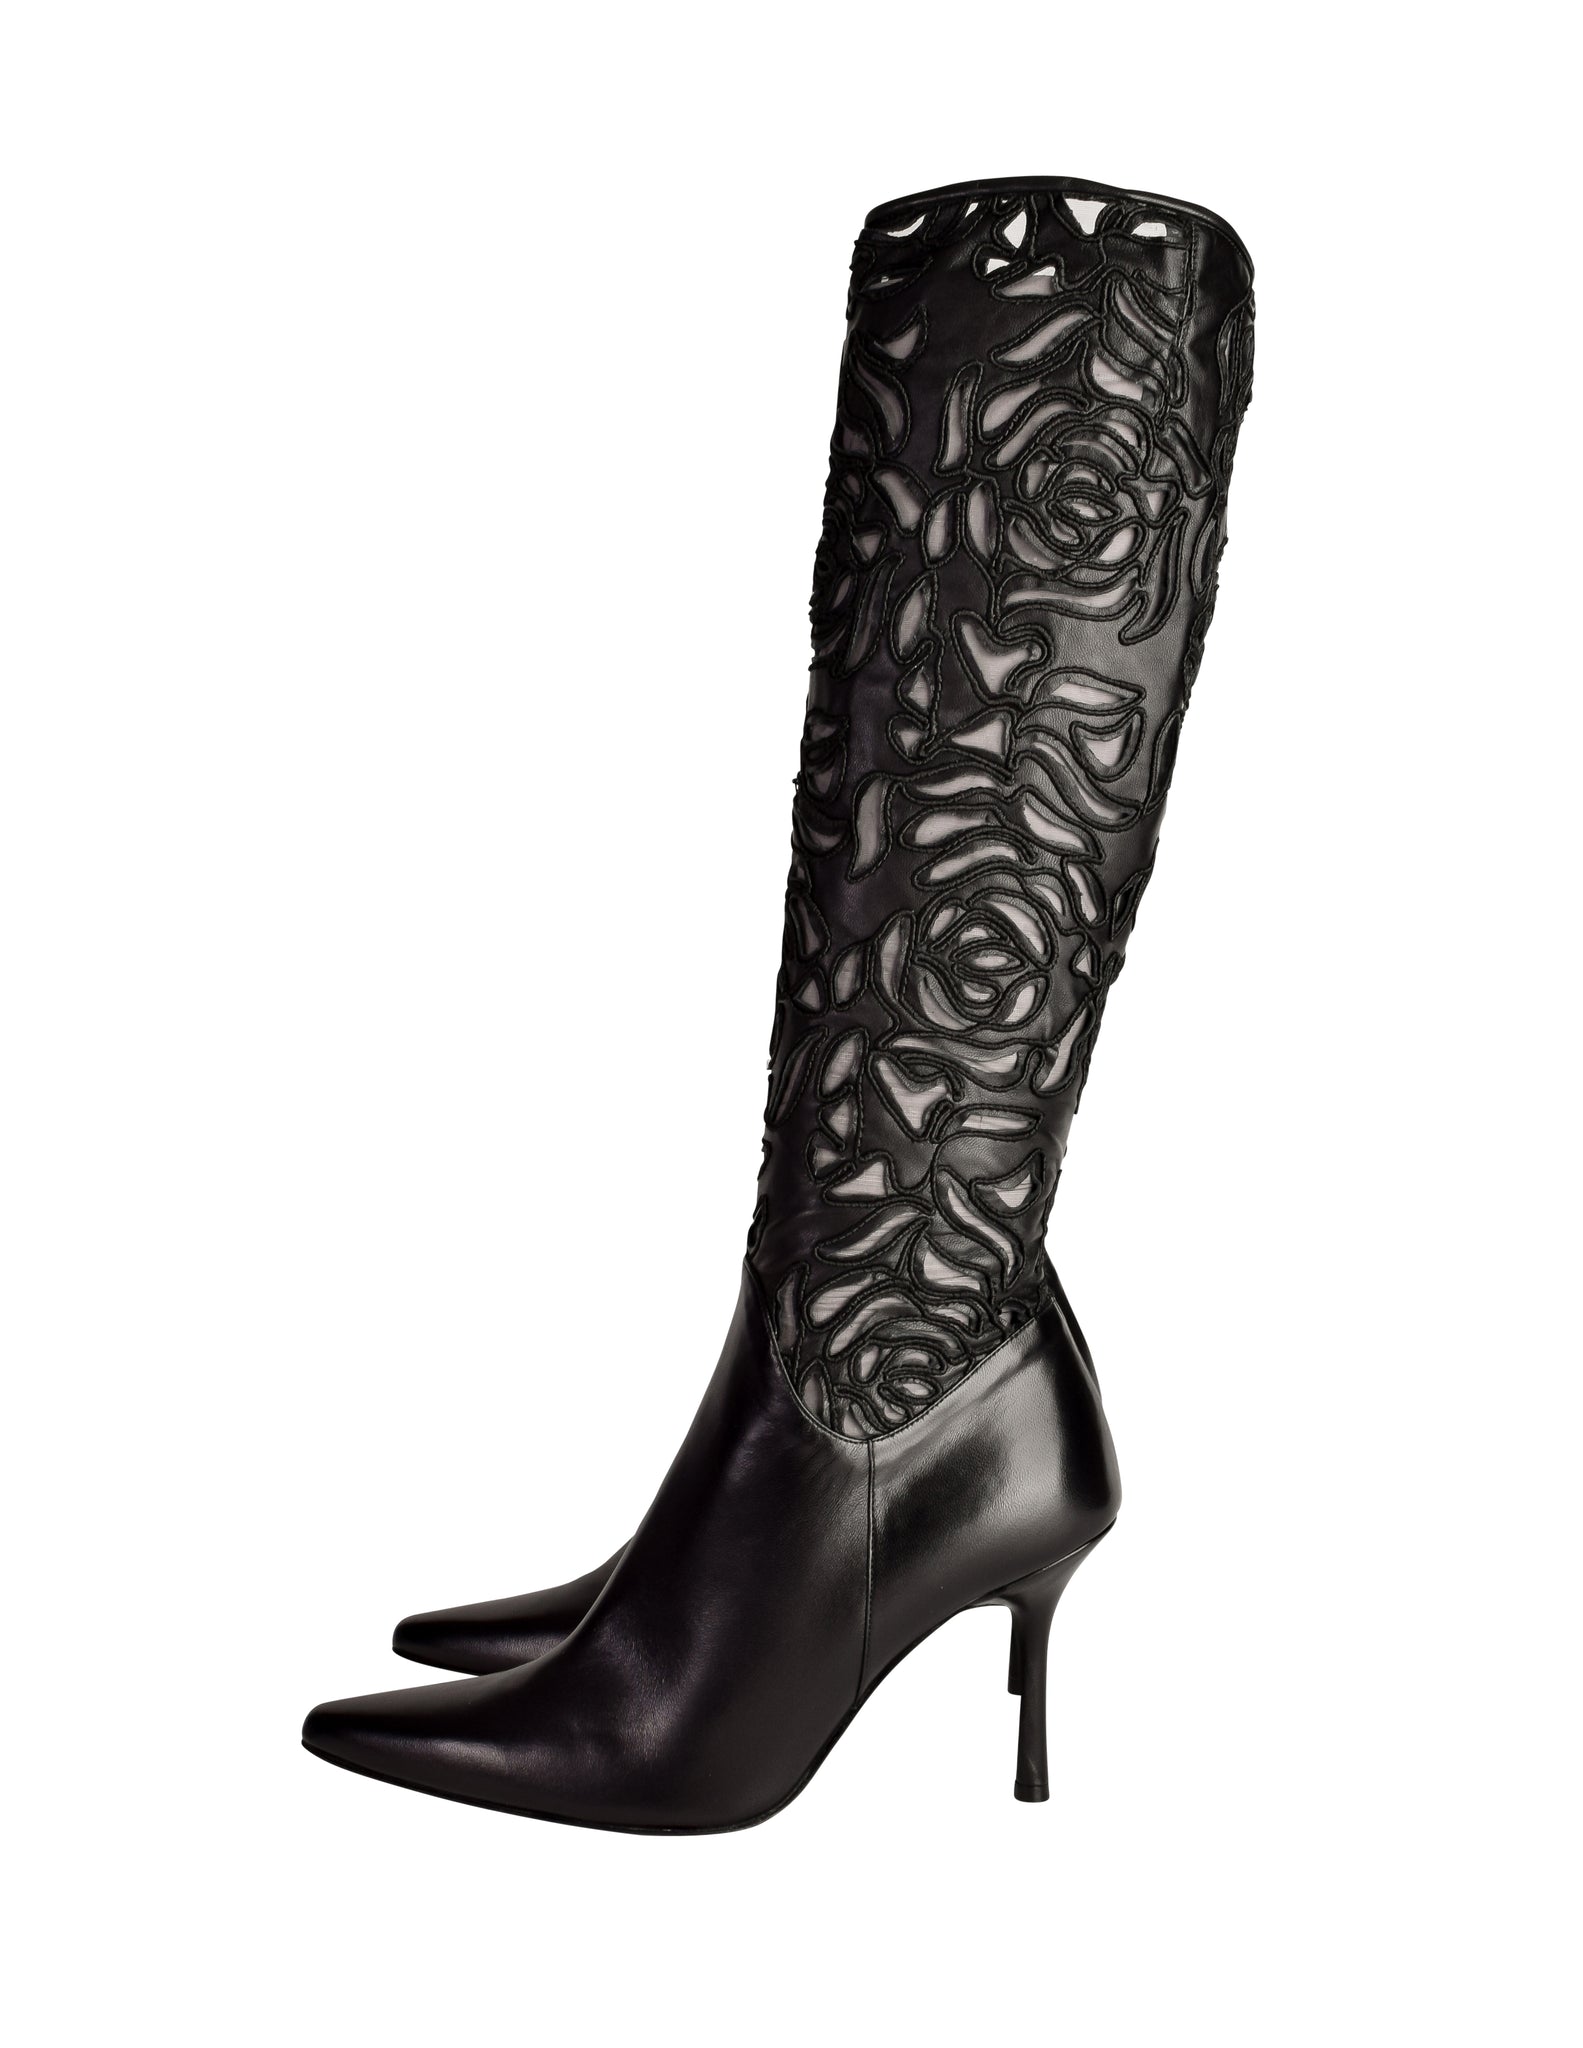 Richard Tyler Vintage Black Leather Embroidered Mesh Cutout Pointed Toe Stiletto Knee High Boots